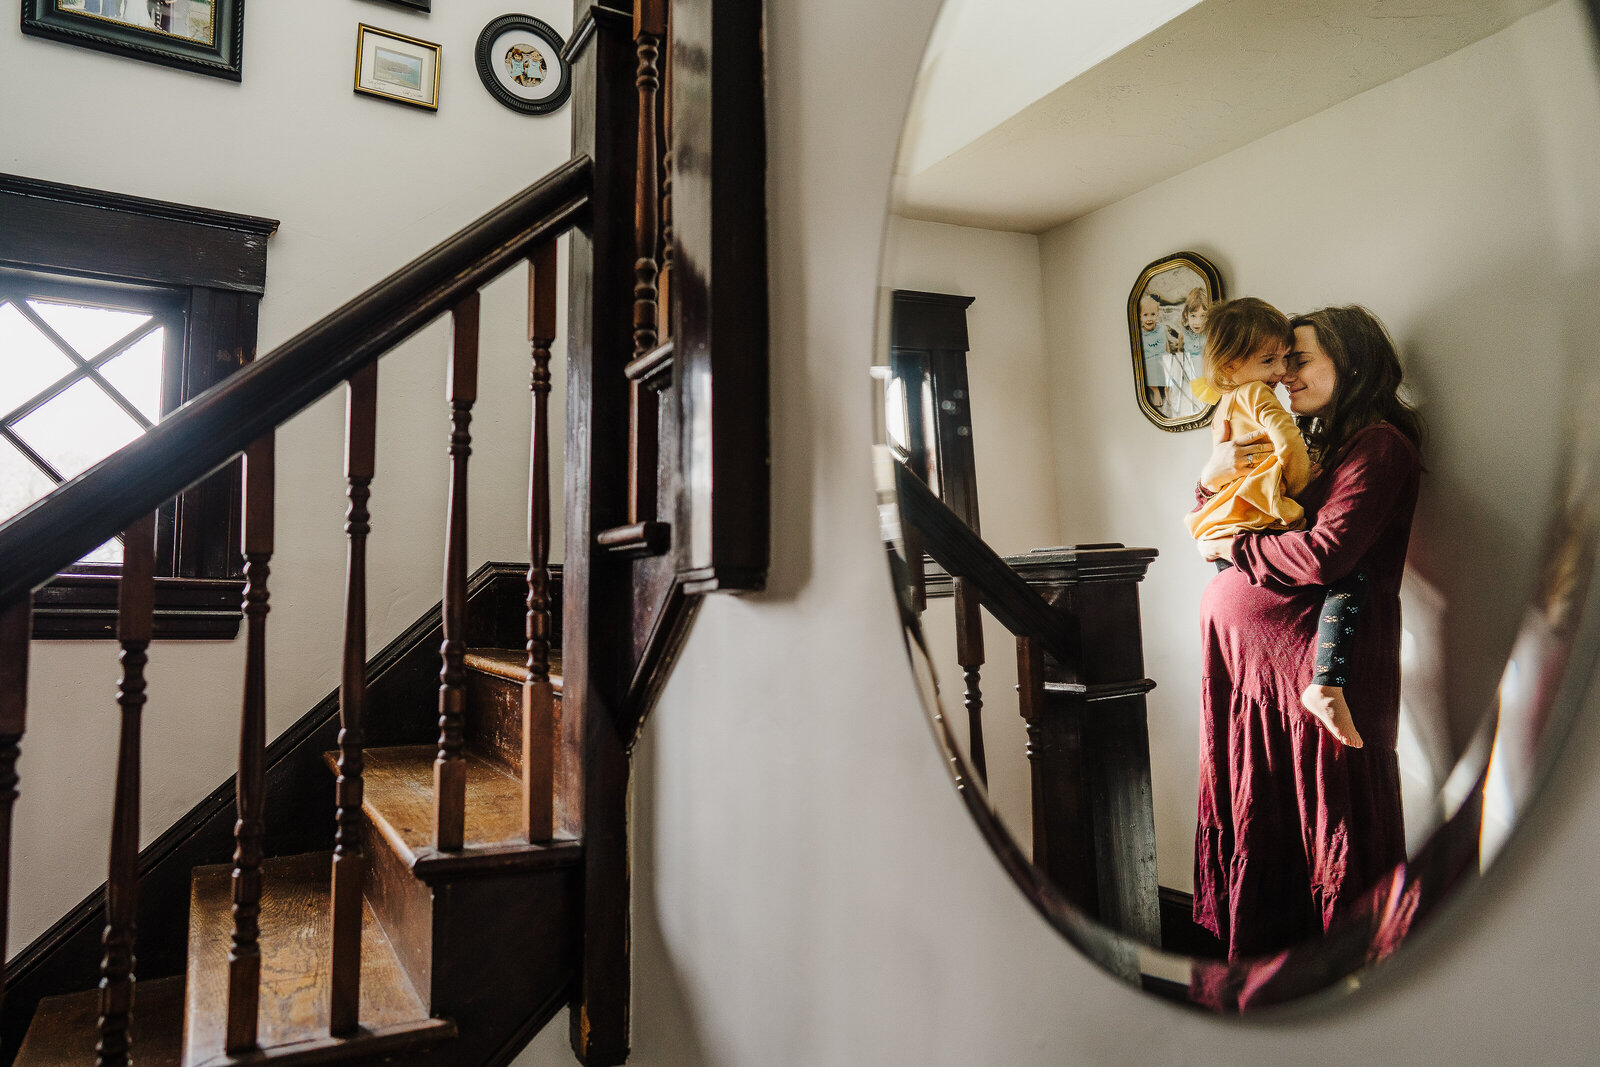 mirror reflection of pregnant woman holding toddler